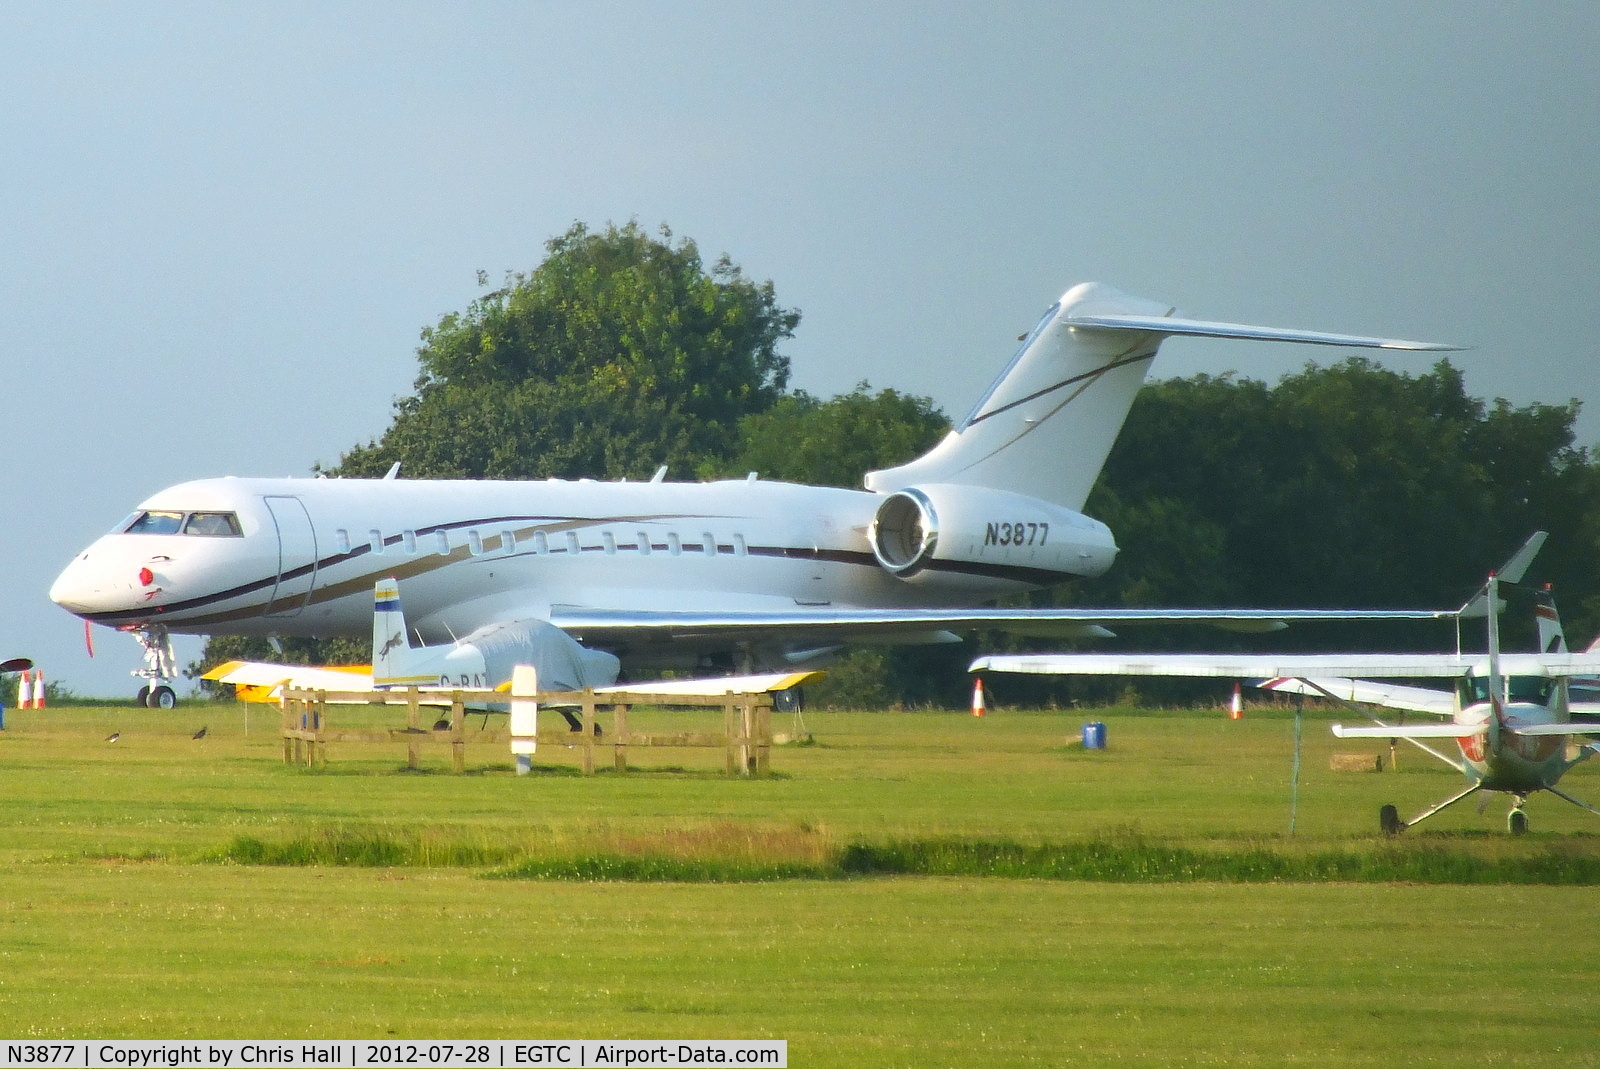 N3877, 2008 Bombardier BD-700-1A10 Global Express C/N 9304, parked at Cranfield